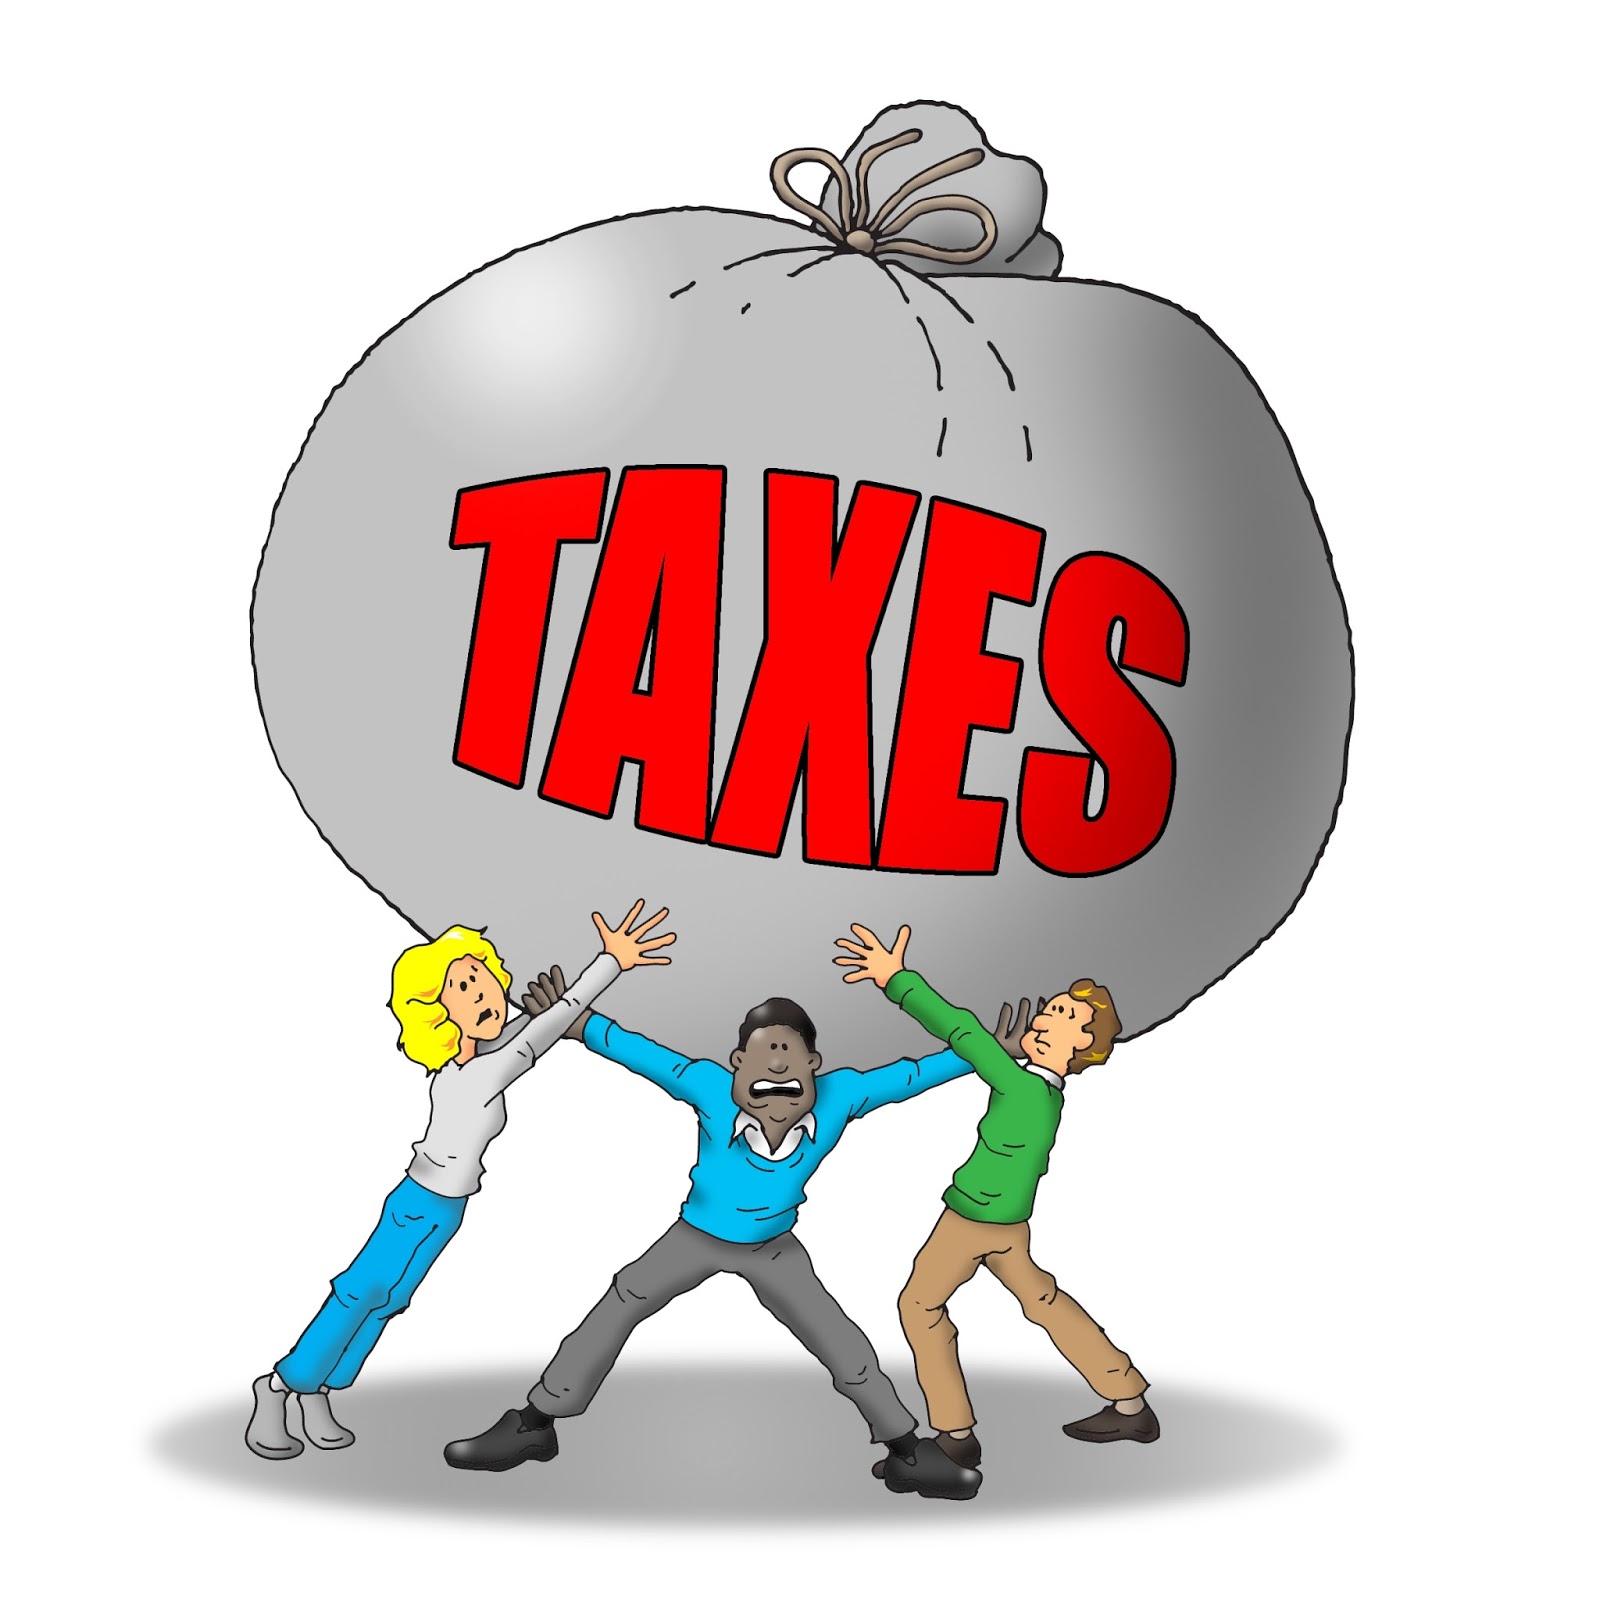 NARSS : The Current Tax System is Unfair To The Middle ...